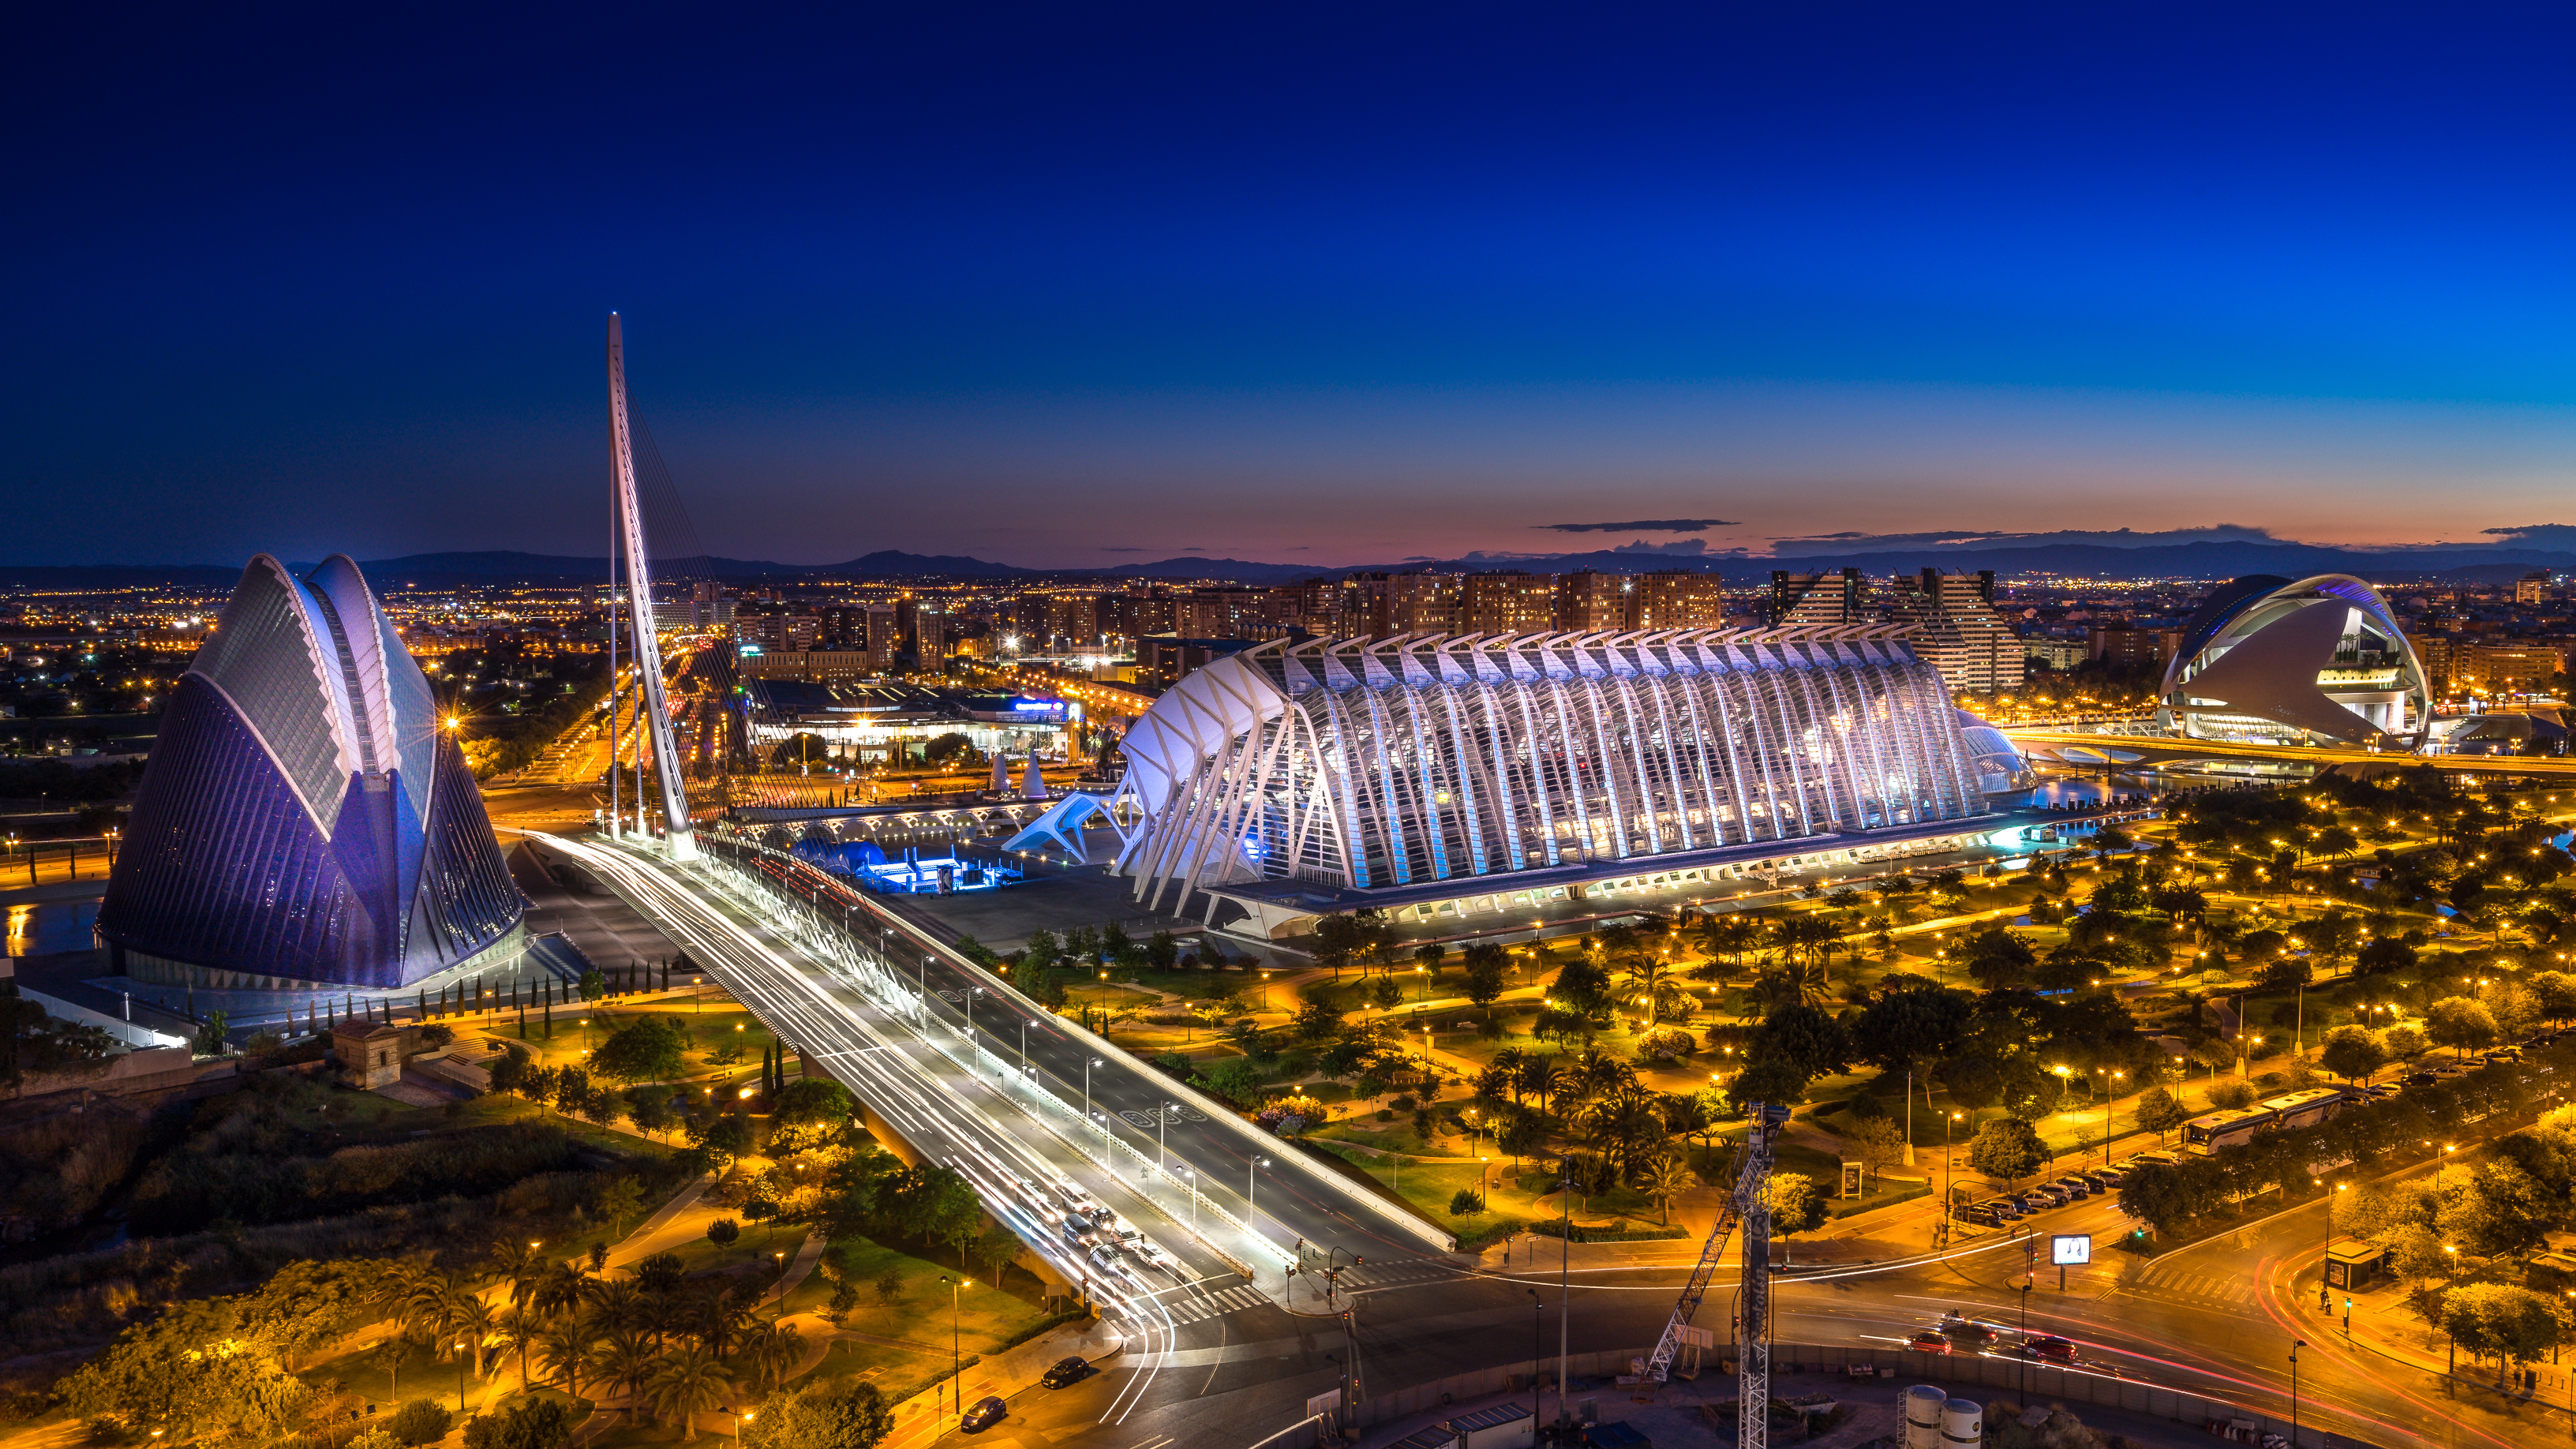 Wallpapers Valencia Queen Sofia Palace of Arts Prince Philip s Museum of Sciences on the desktop